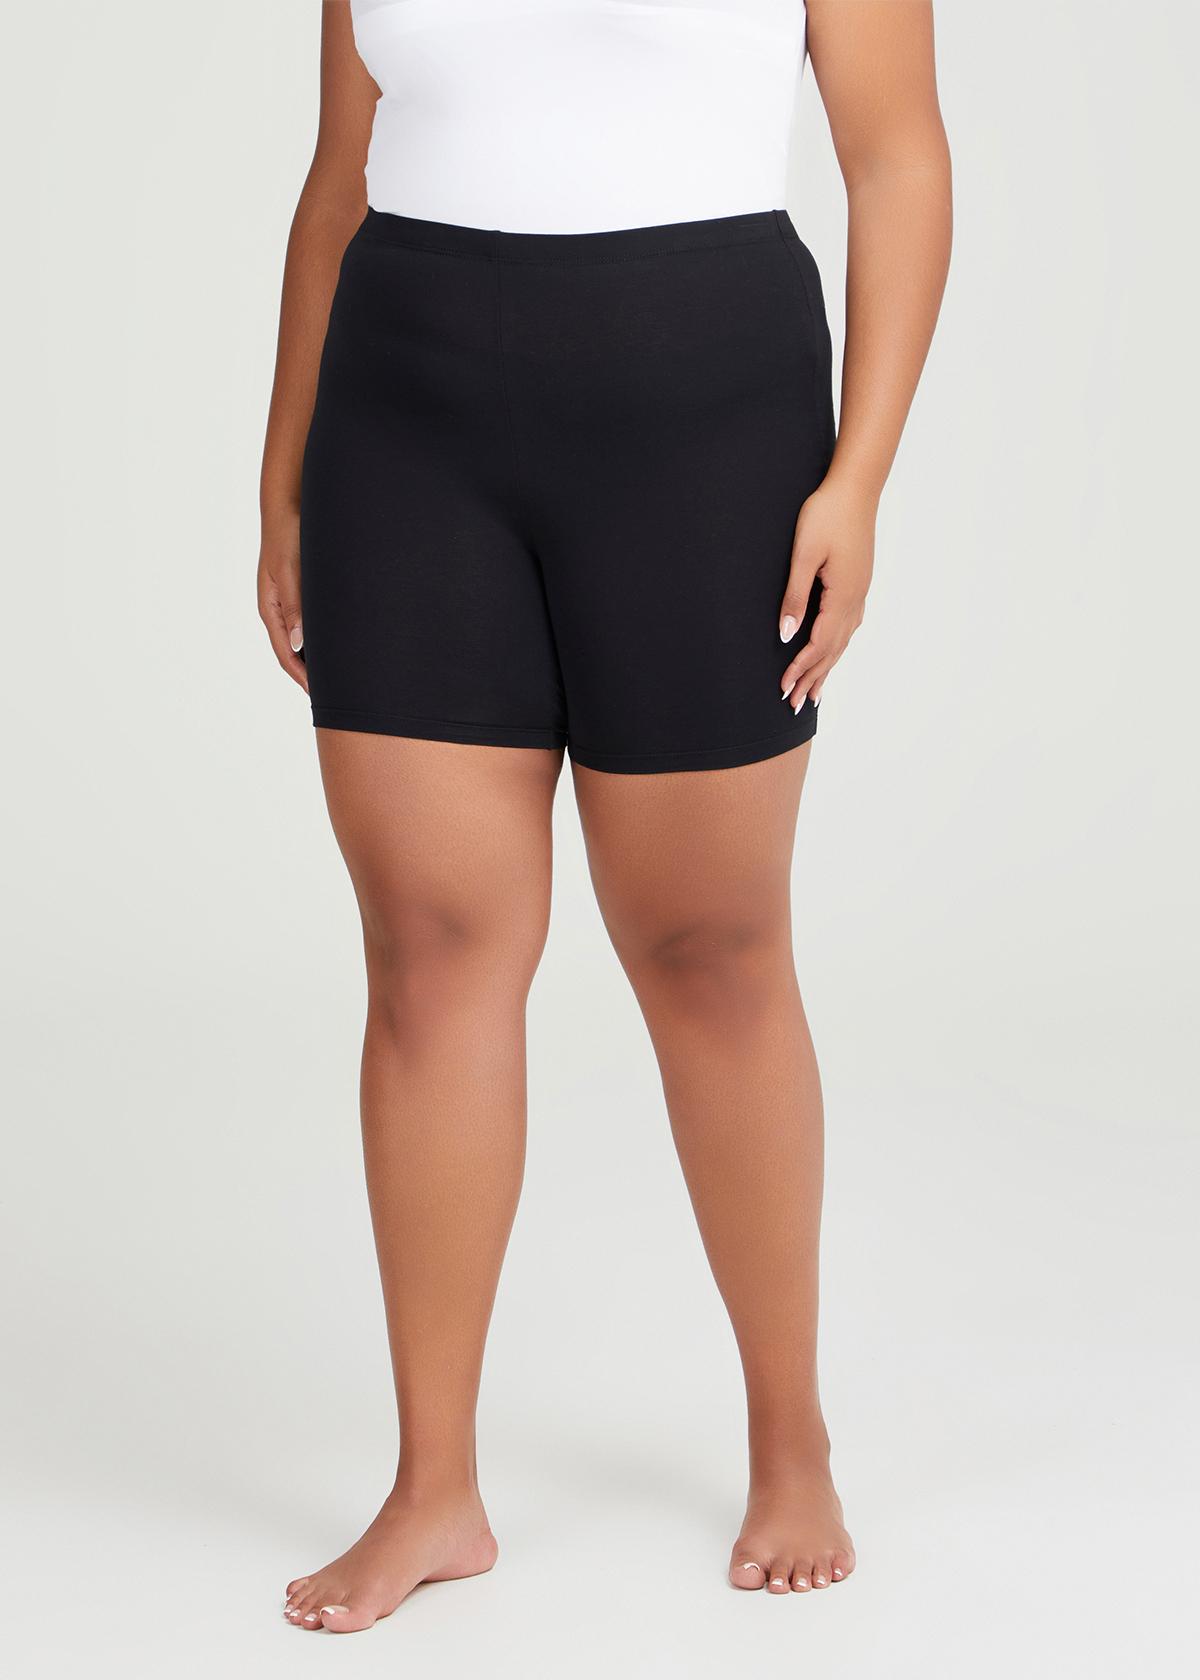 Plus Size Black Anti Chafing High Waisted Shorts